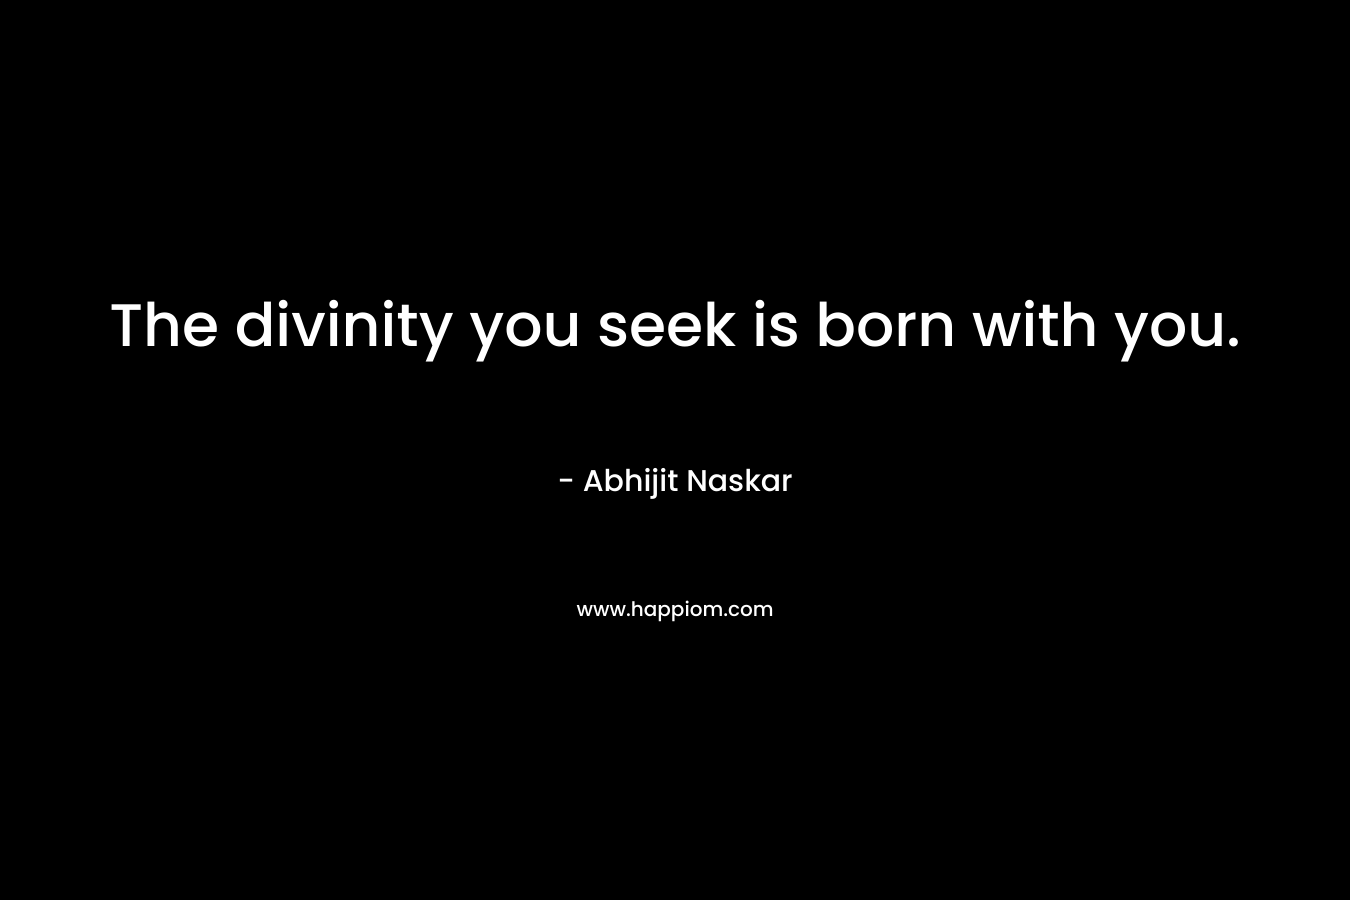 The divinity you seek is born with you.